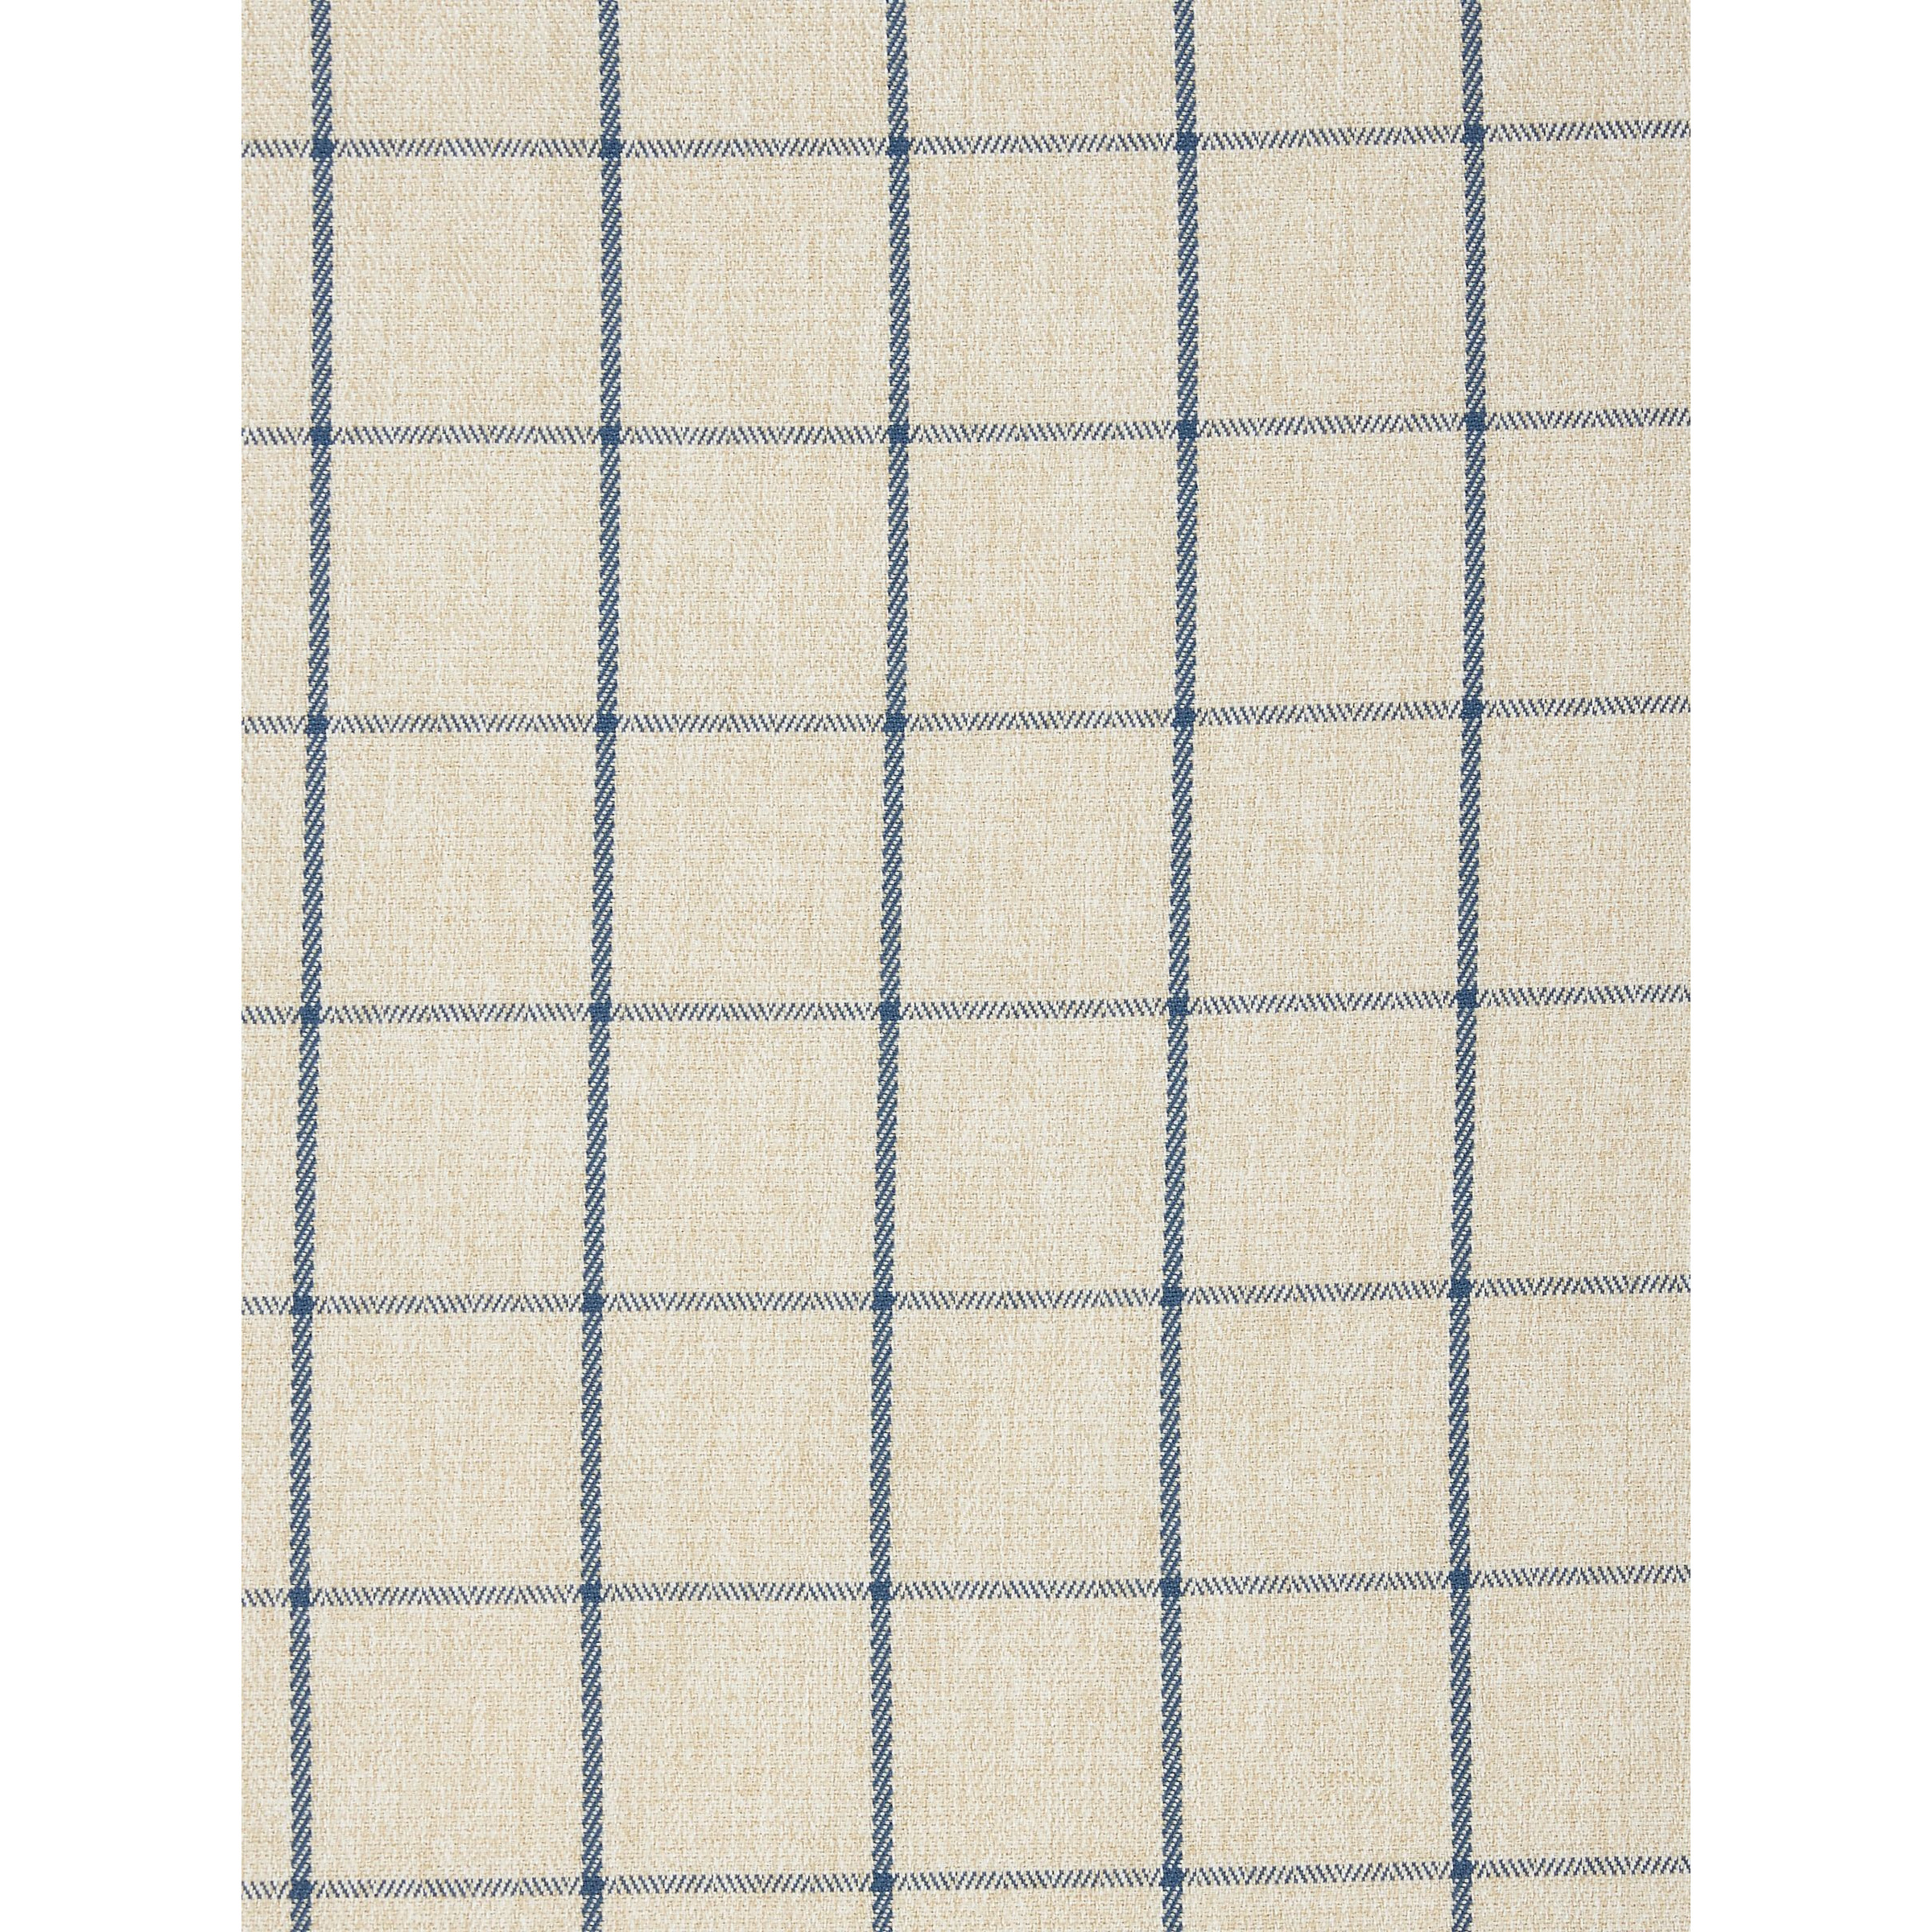 John Lewis Classic Check Made to Measure Curtains or Roman Blind, Lake Blue - image 1